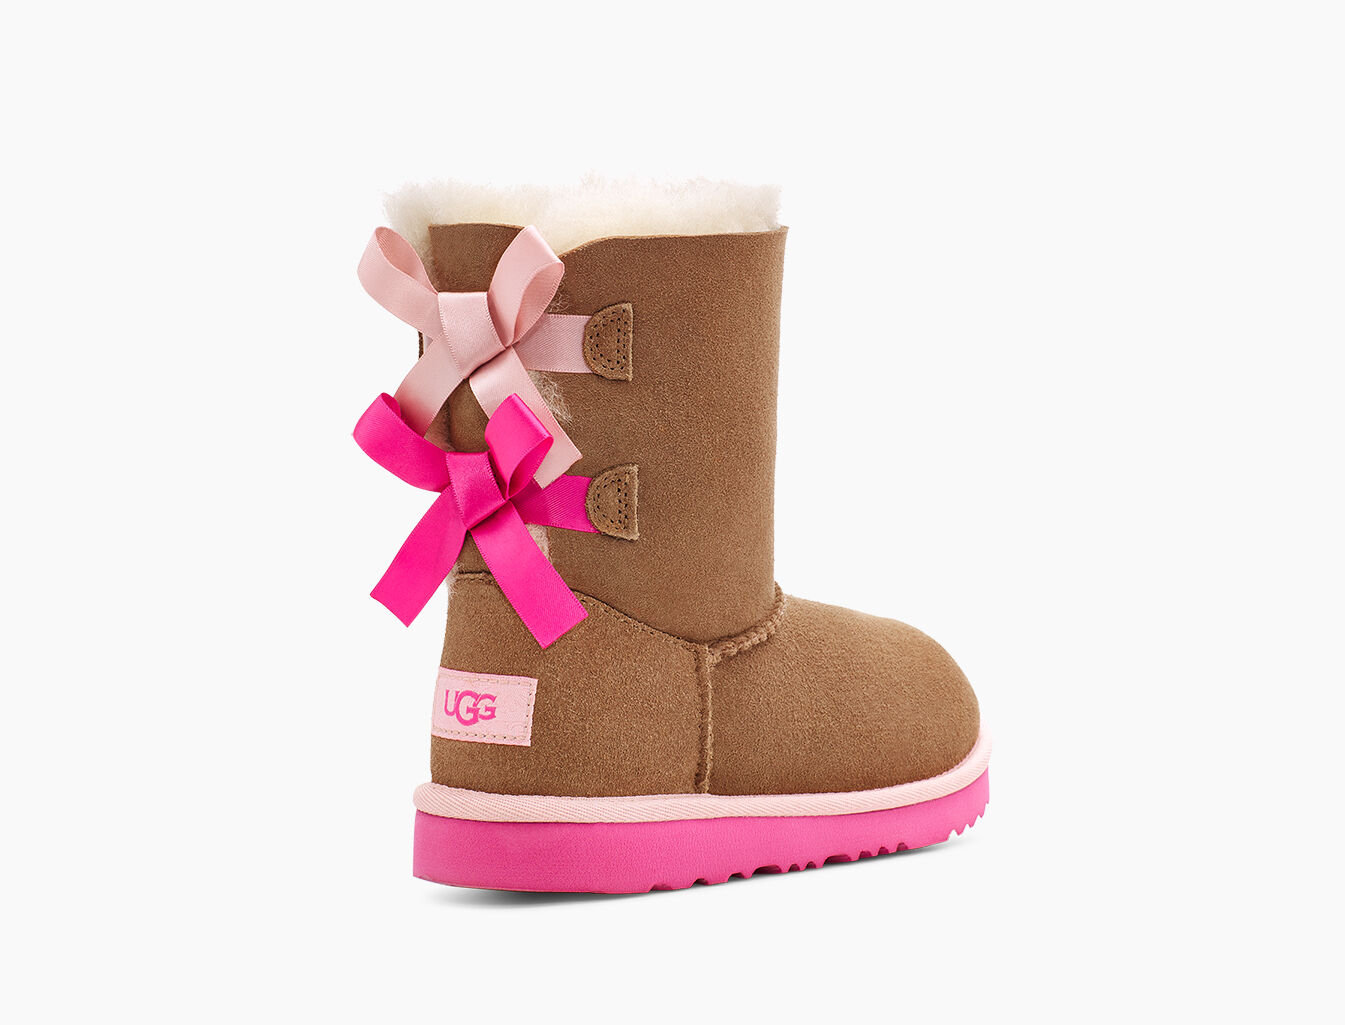 junior ugg boots size 3